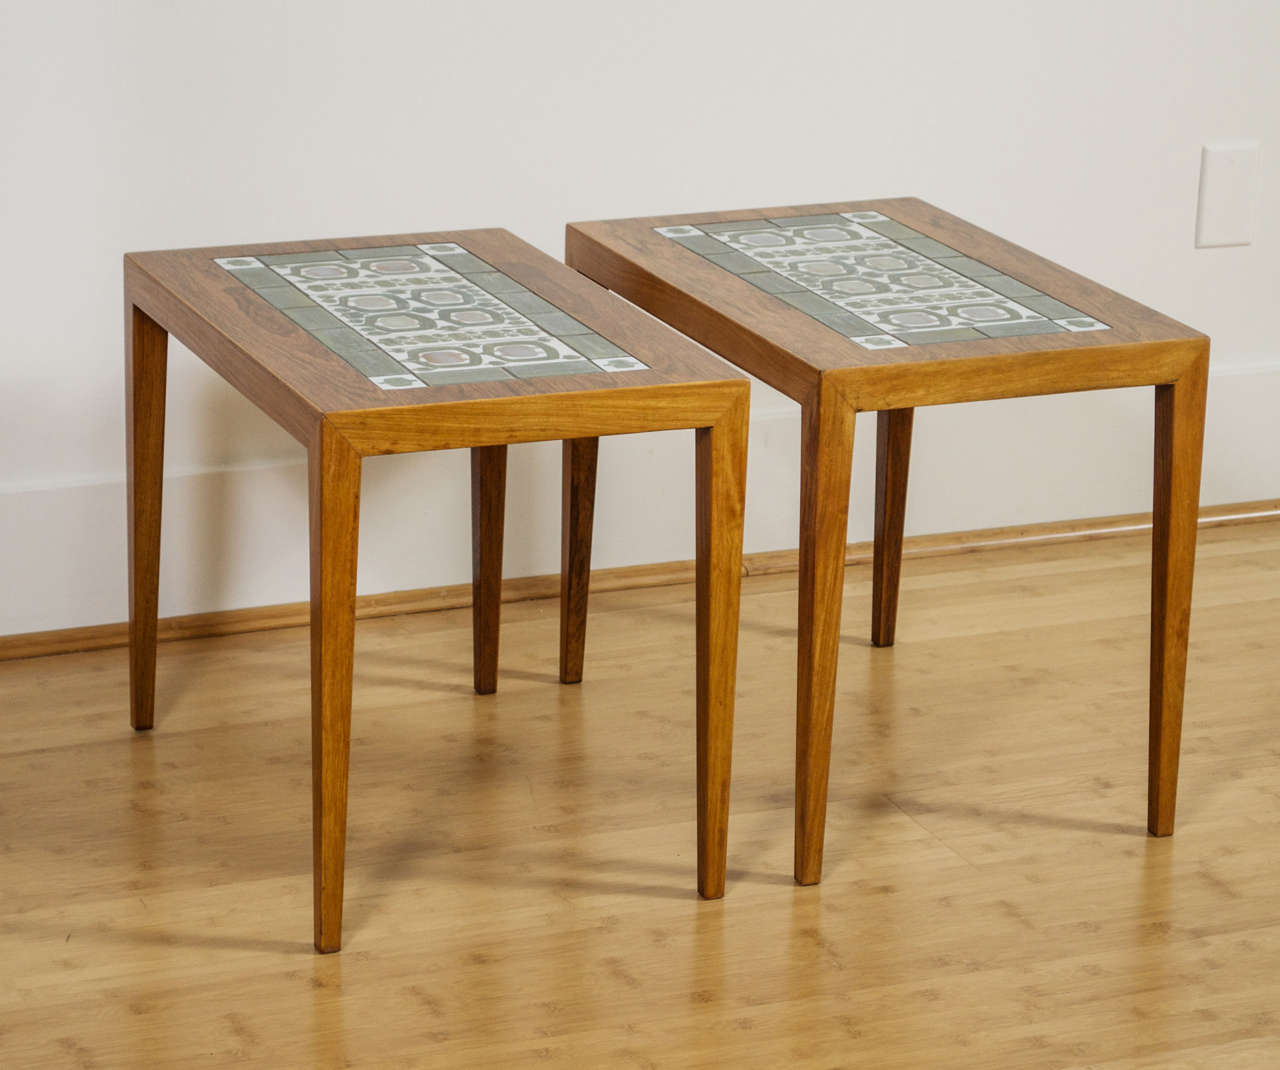 Mid-Century Modern Haslev Furniture - Nils Thorsen Tiles - Pair of Side Tables